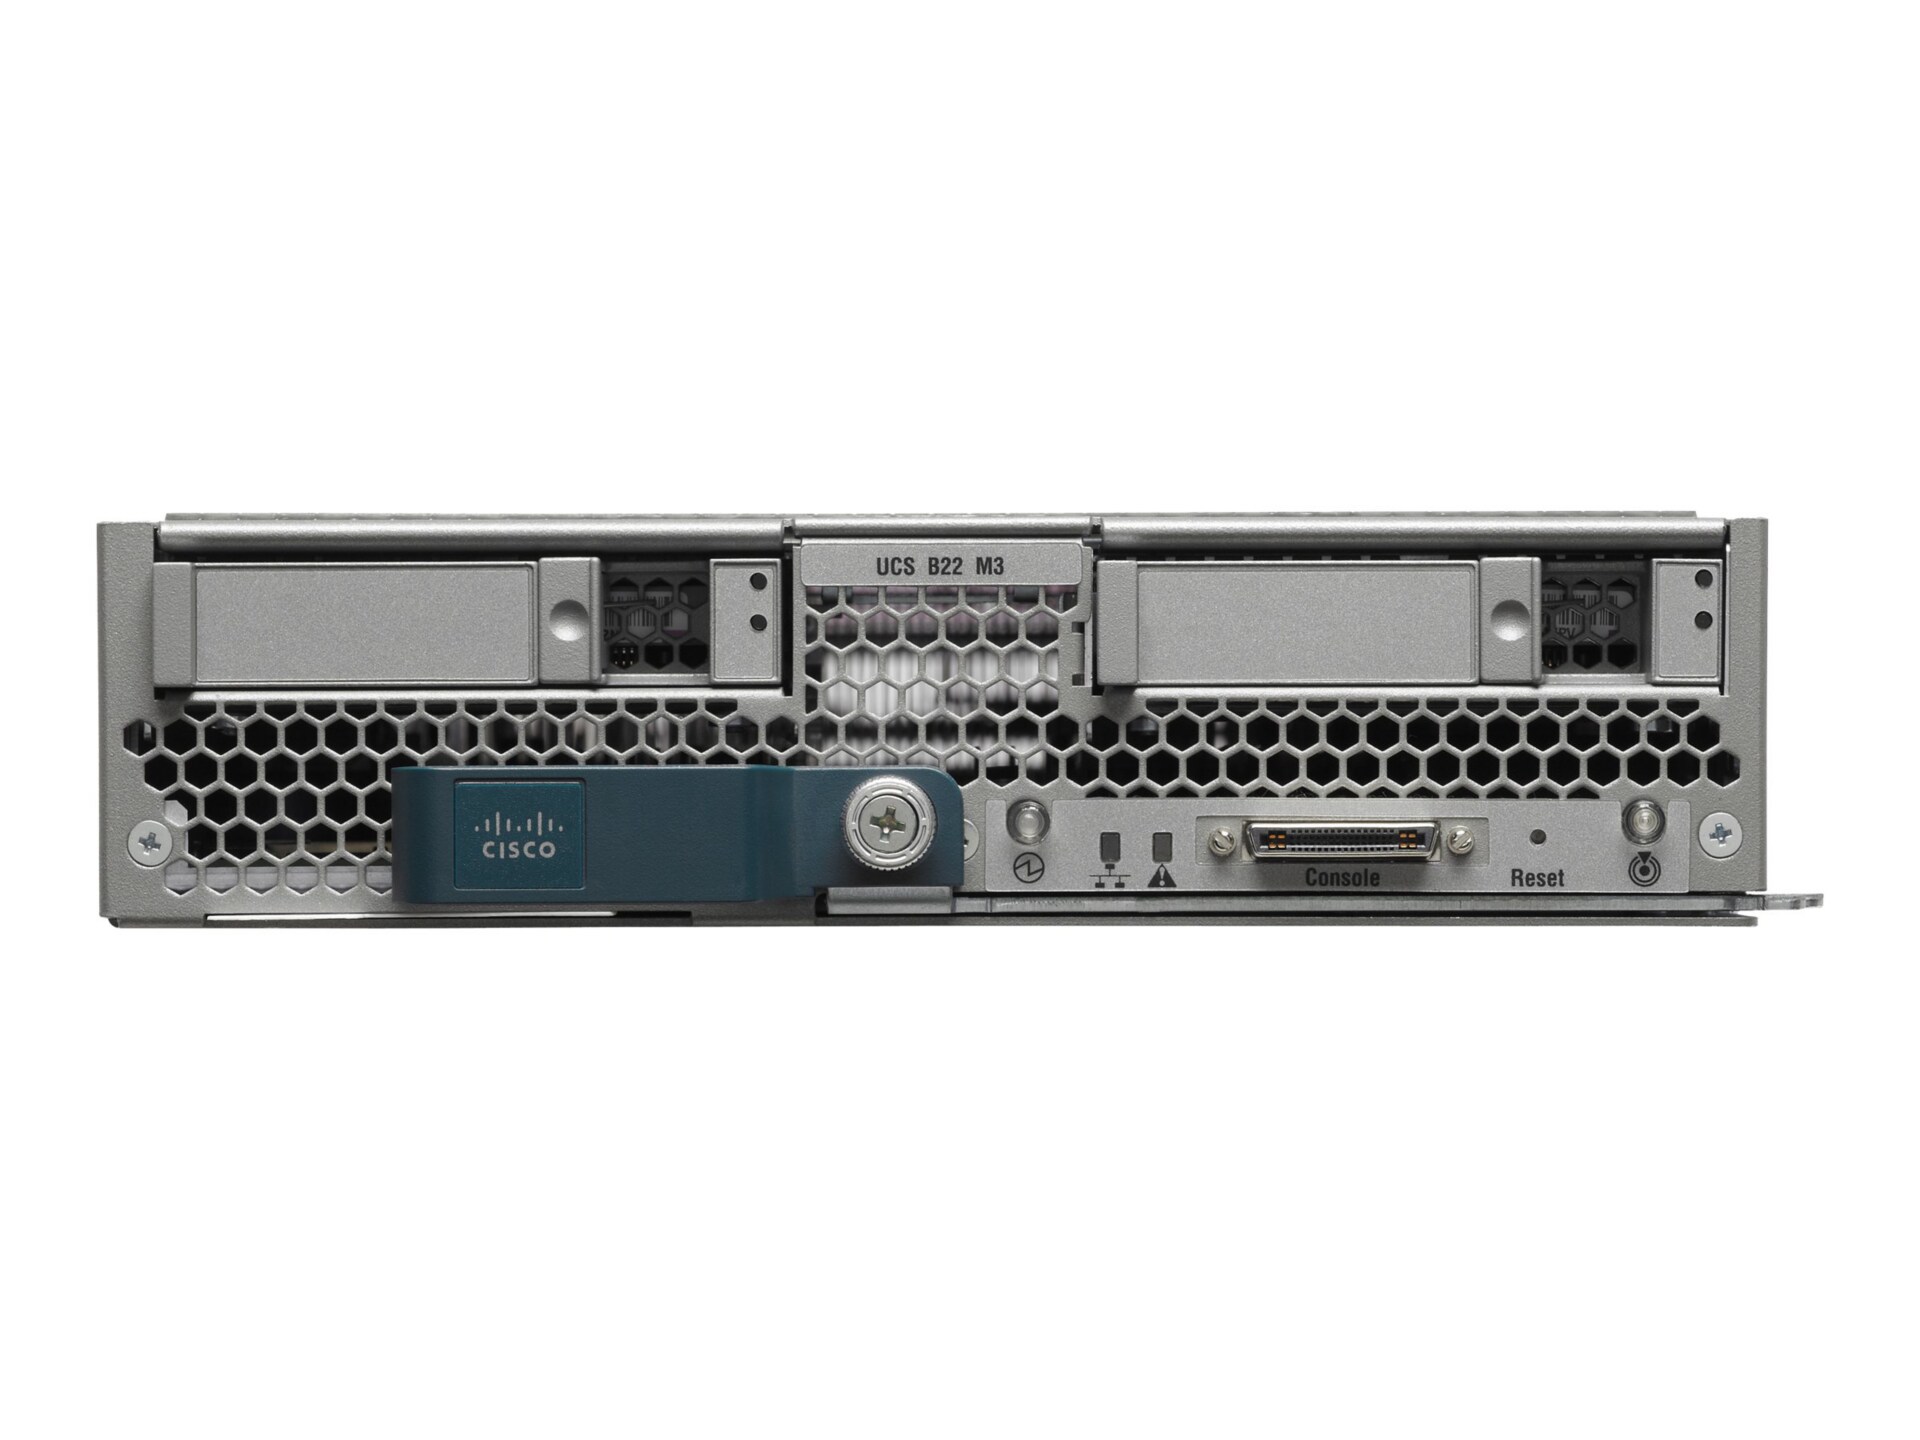 Cisco UCS B22 M3 Entry SmartPlay Expansion Pack - blade - Xeon E5-2420 1.9 GHz - 48 GB - no HDD